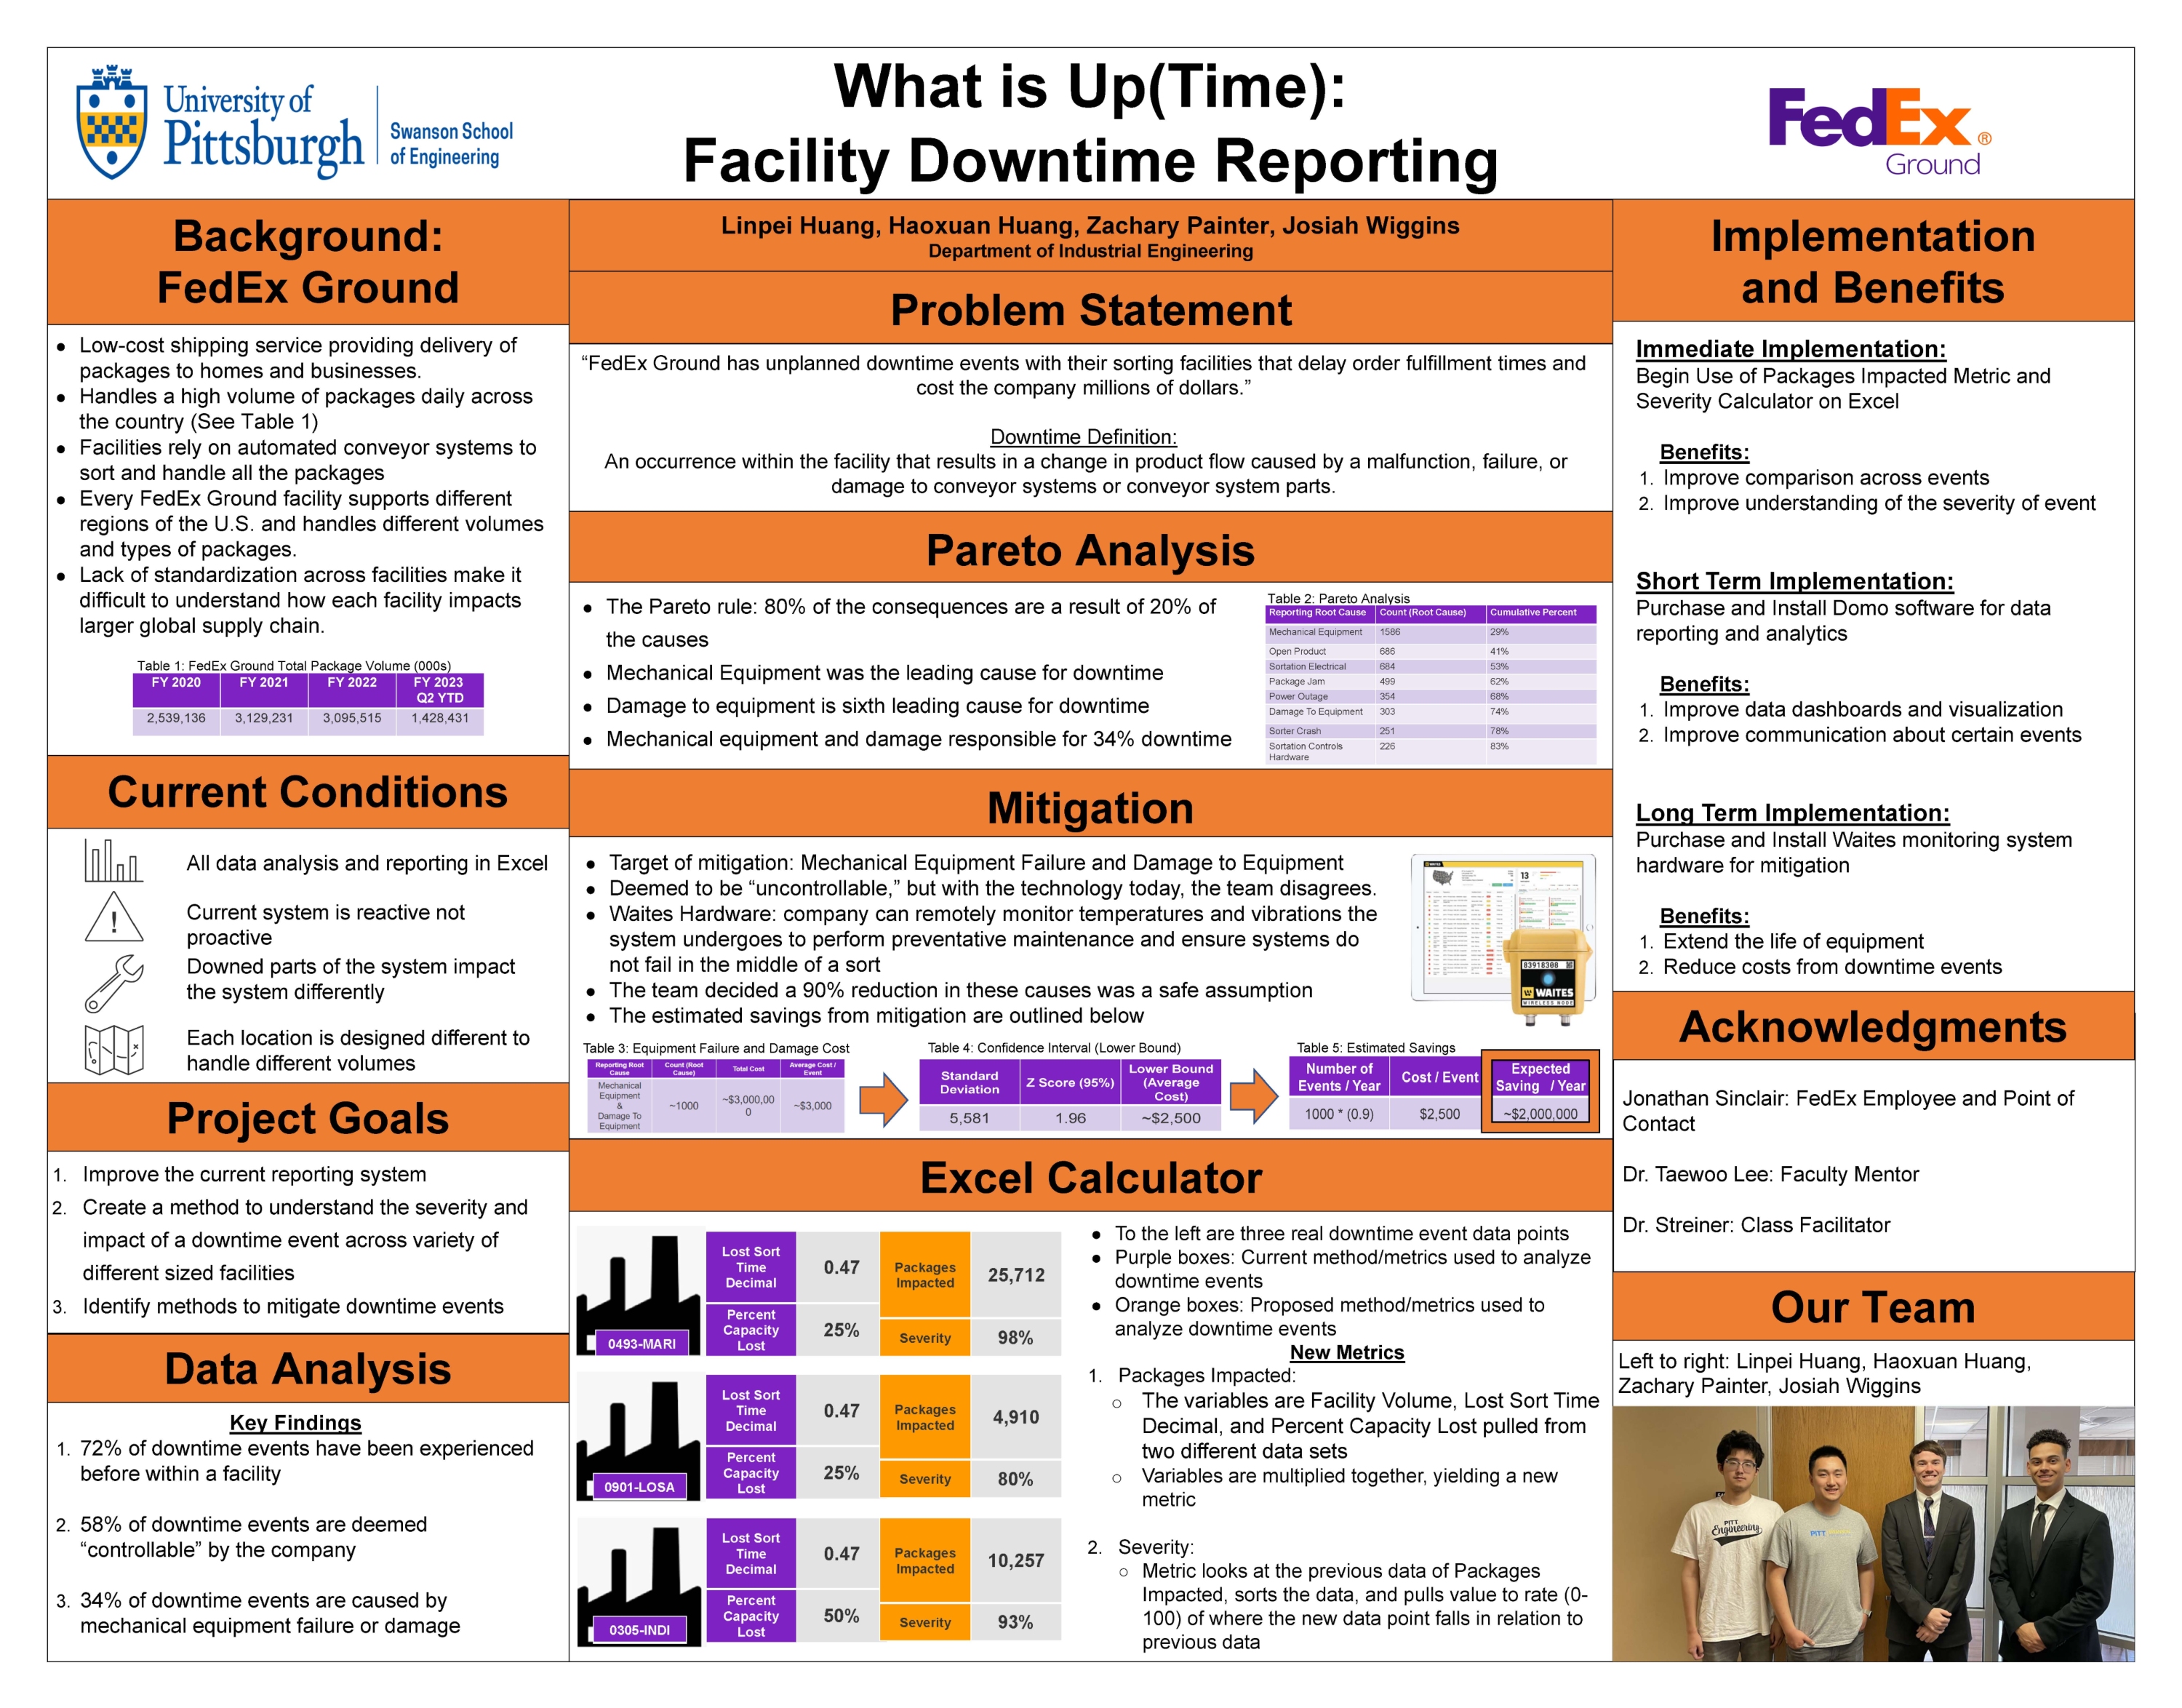 fedex ground What is Up(Time): Facility Downtime Reporting project poster